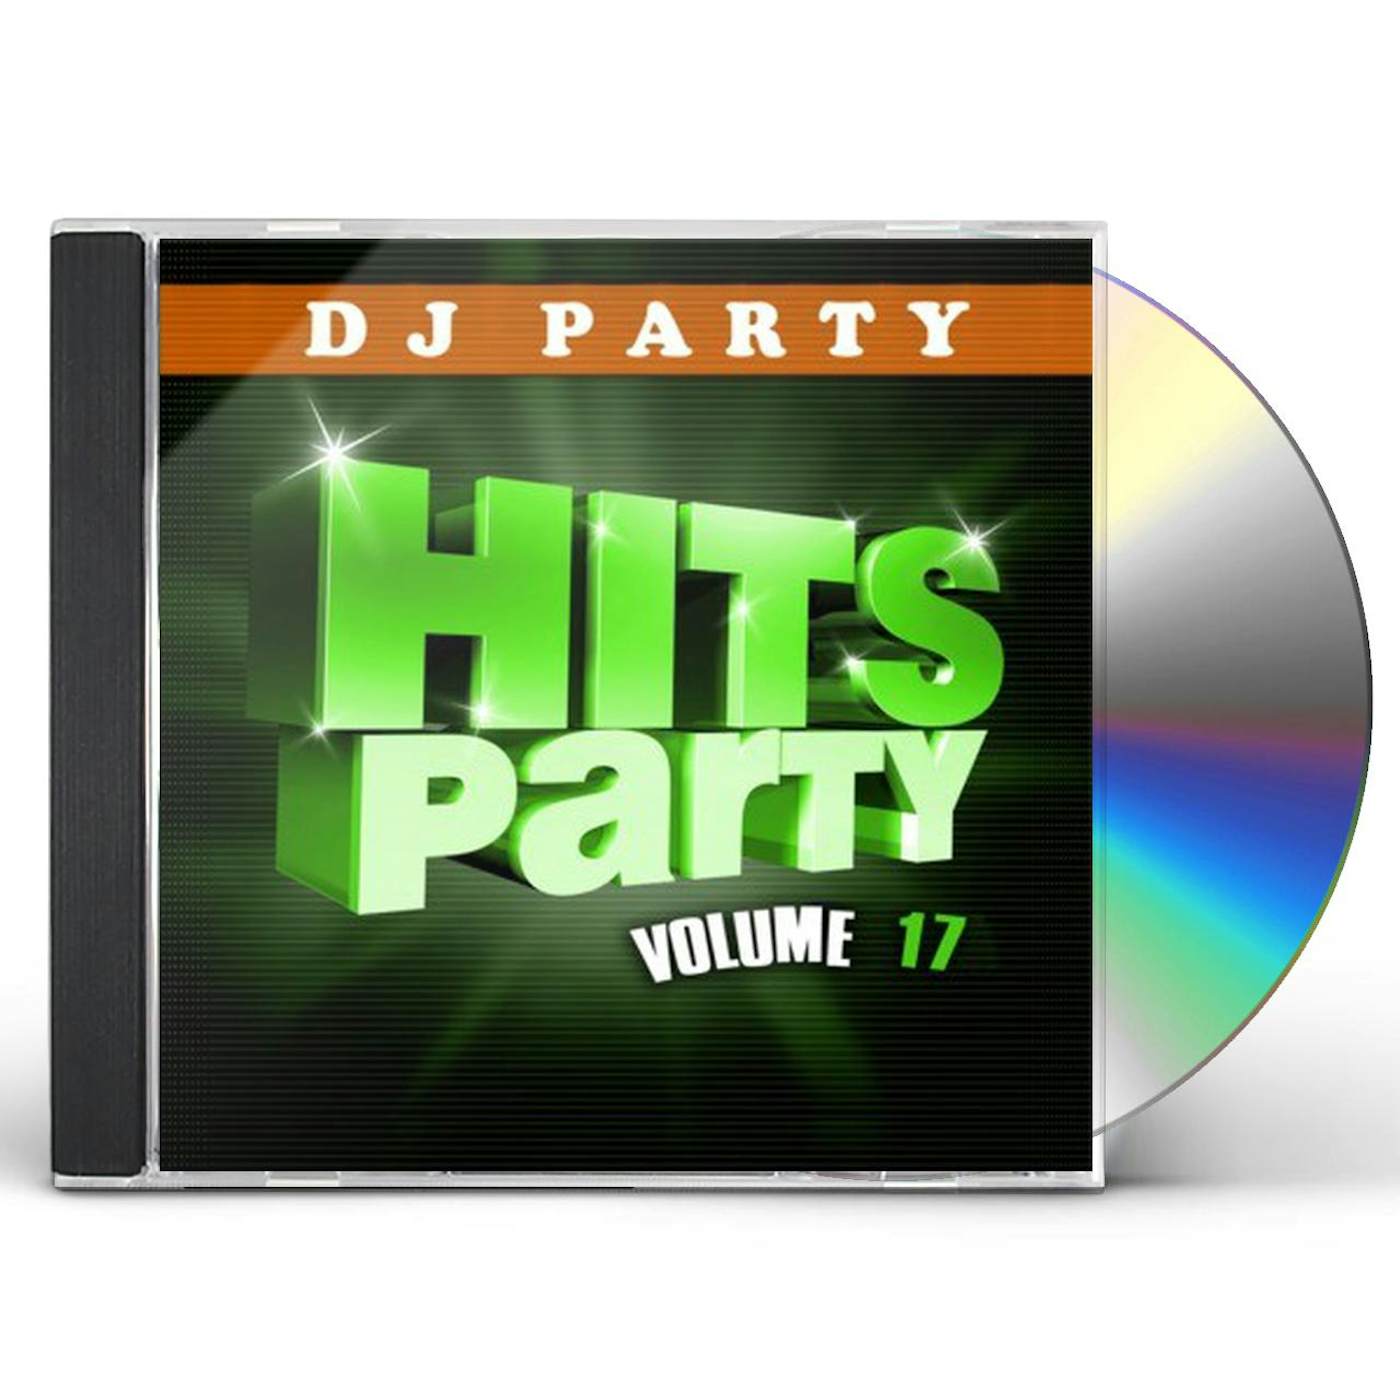 DJ Party HITS PARTY 17 CD